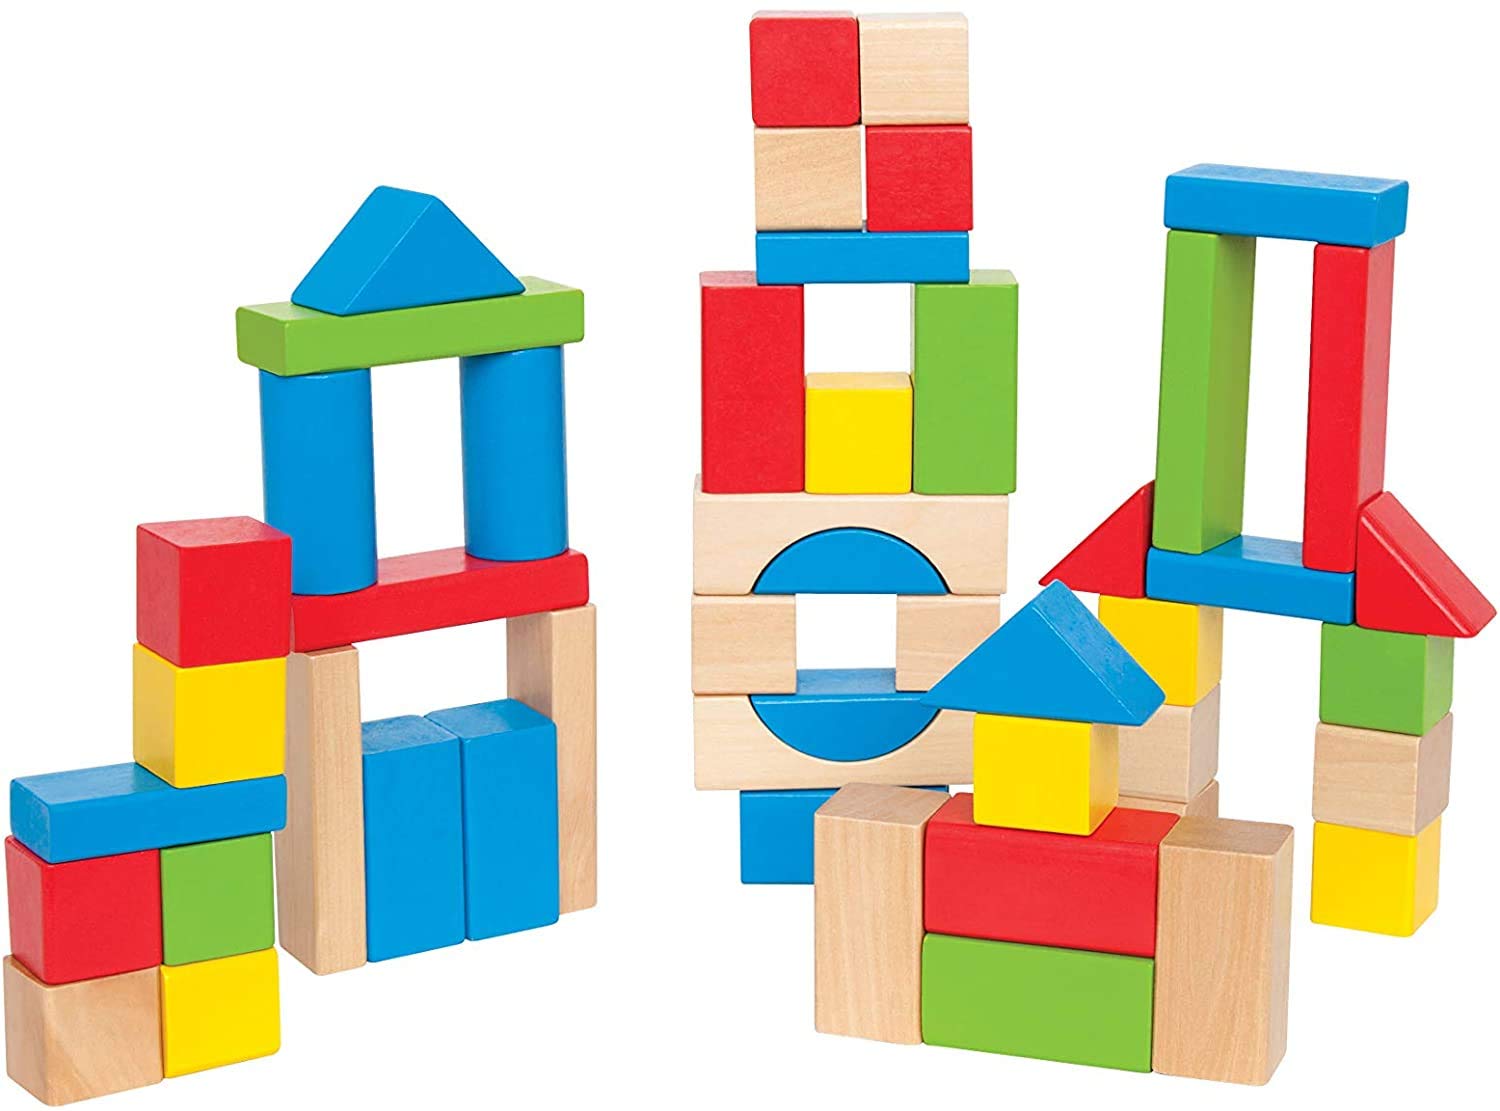  Colorful wooden blocks in various shapes arranged in several structures on a white background.